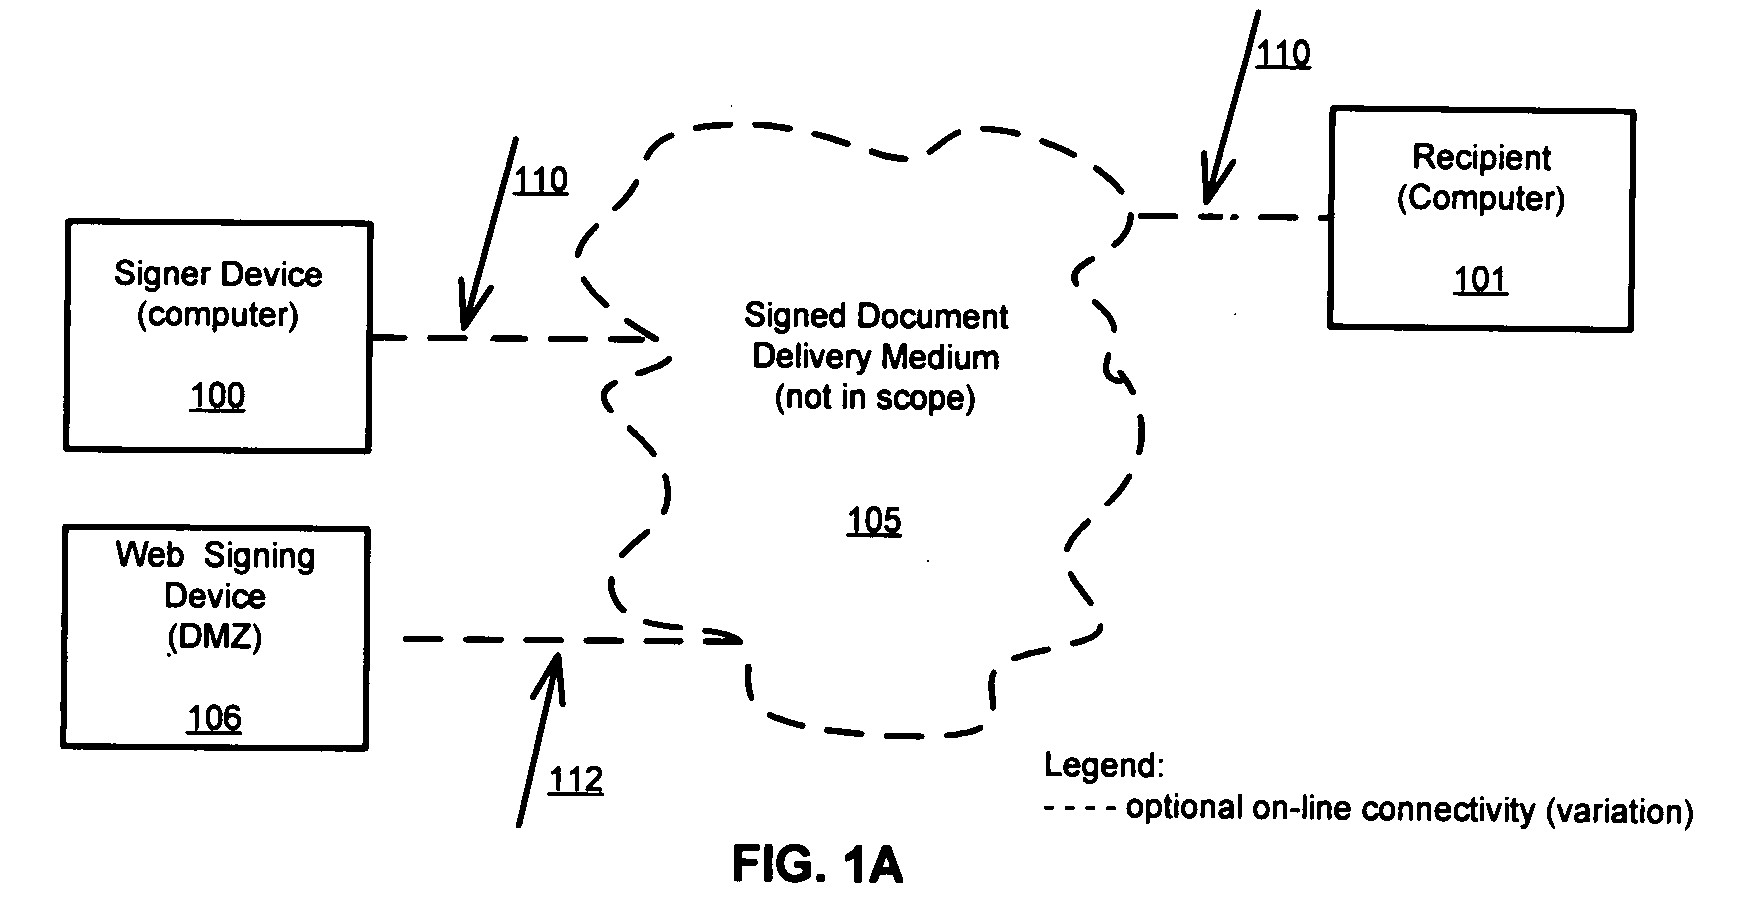 Method and system for signer self-managed, encryption-based identification and signature secret management to verify signer and to legitimize basic digital signature without the use of certificates, tokens or PKI (private key infrastructure)